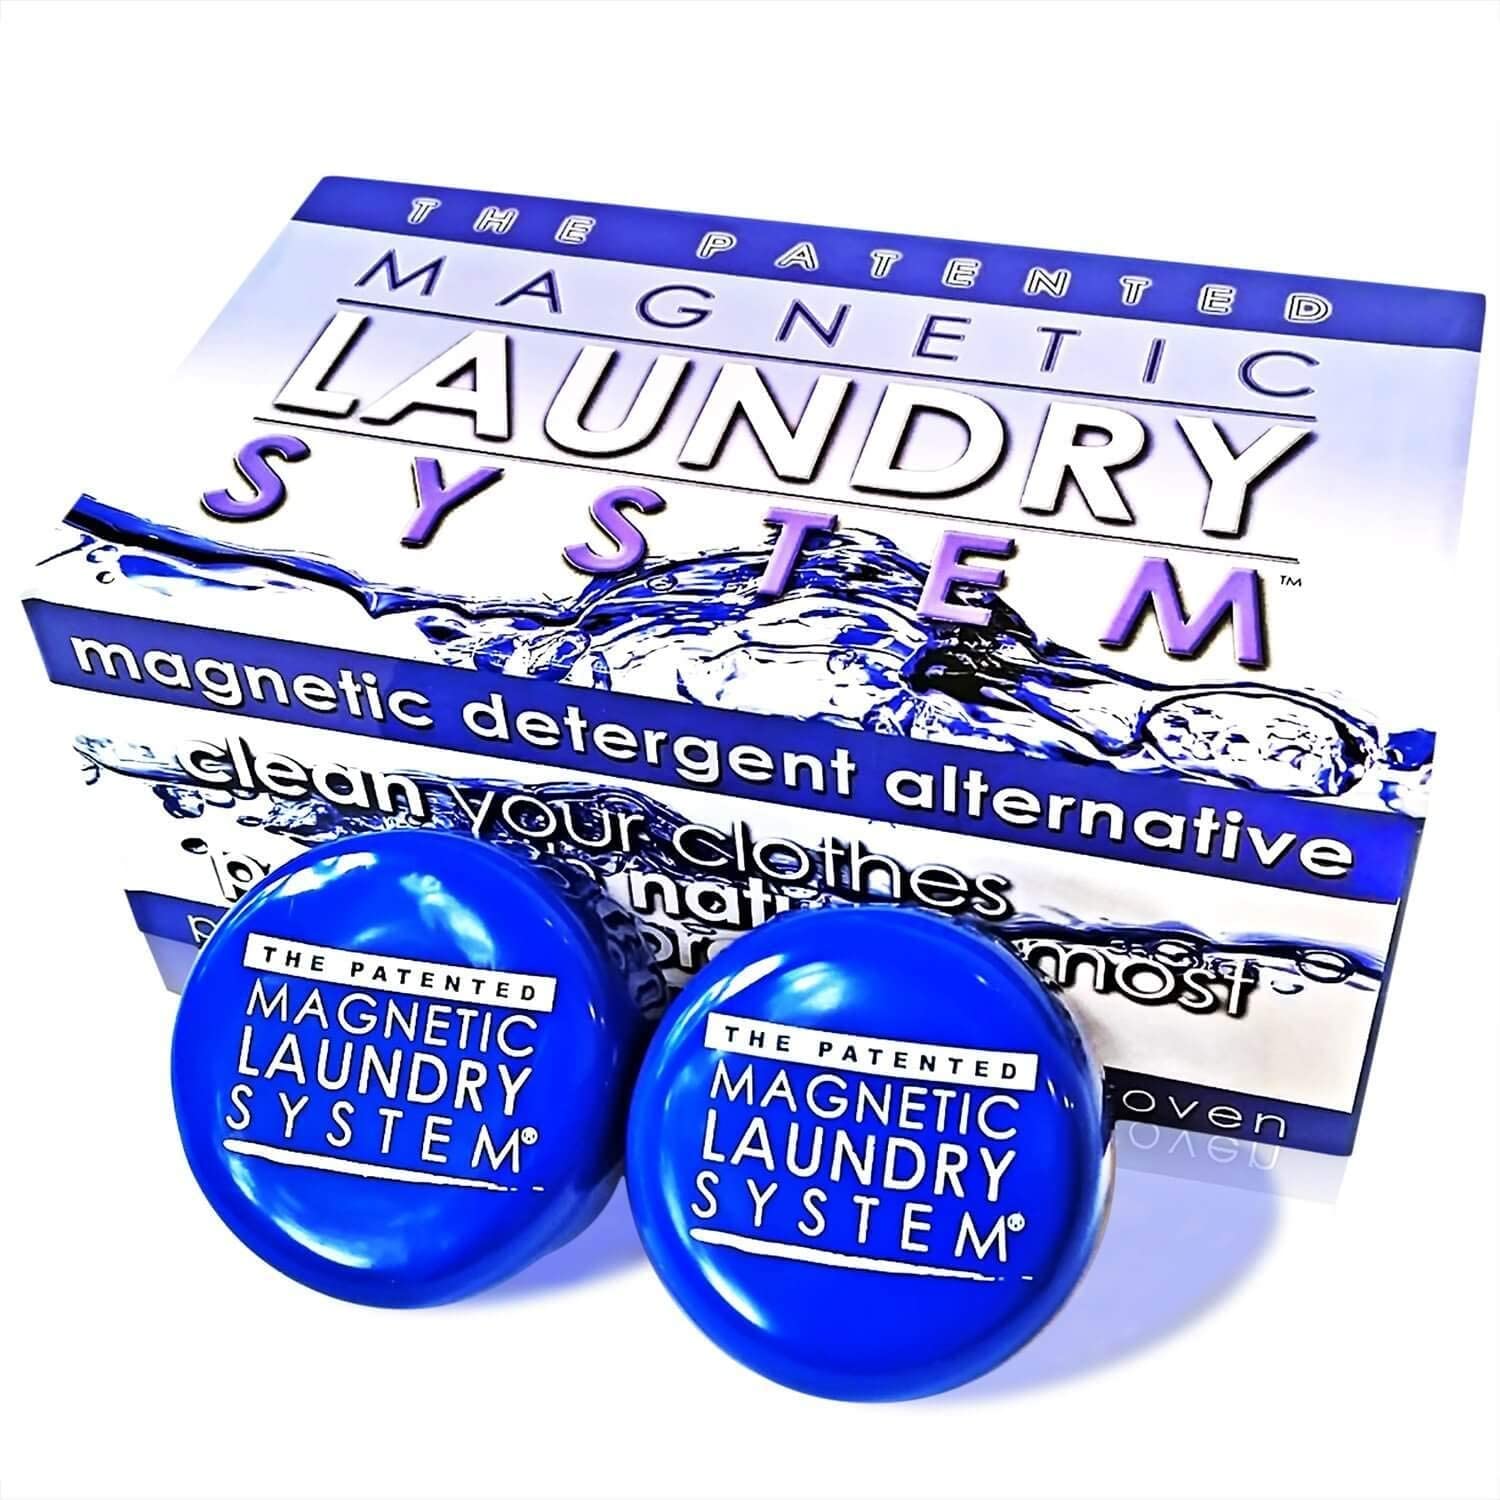 Laundry Magnets Review